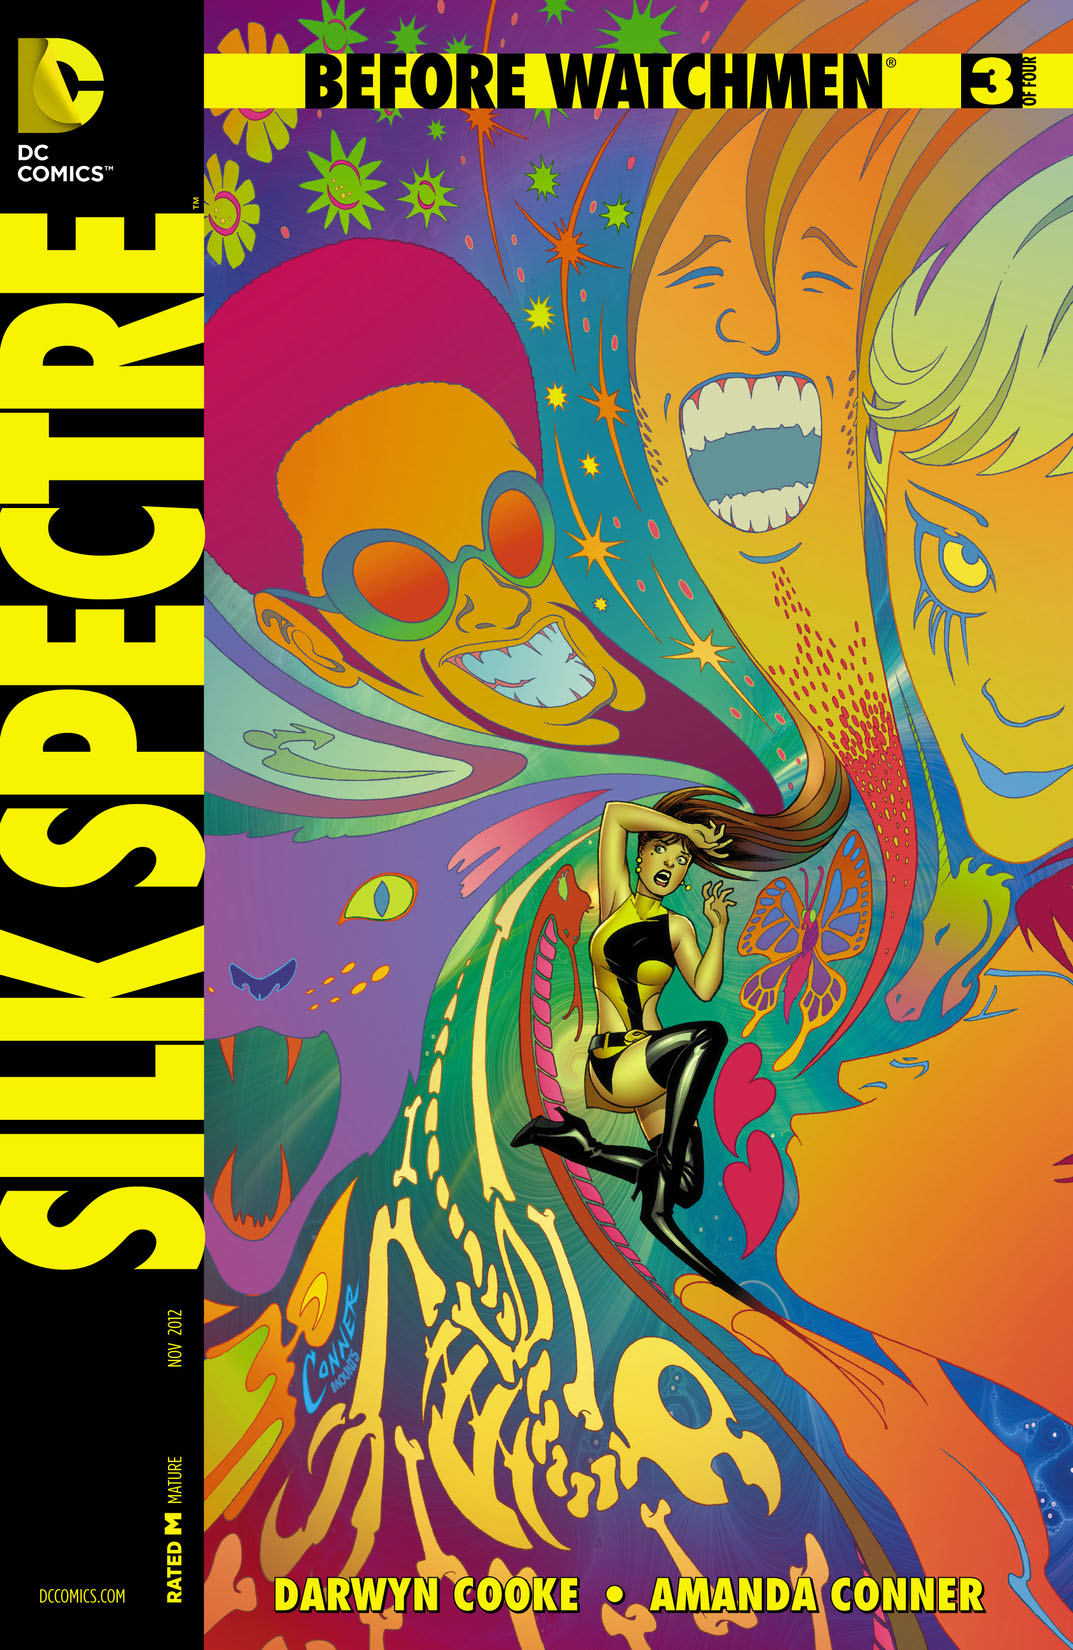 Before Watchmen: Silk Spectre #3 preview images